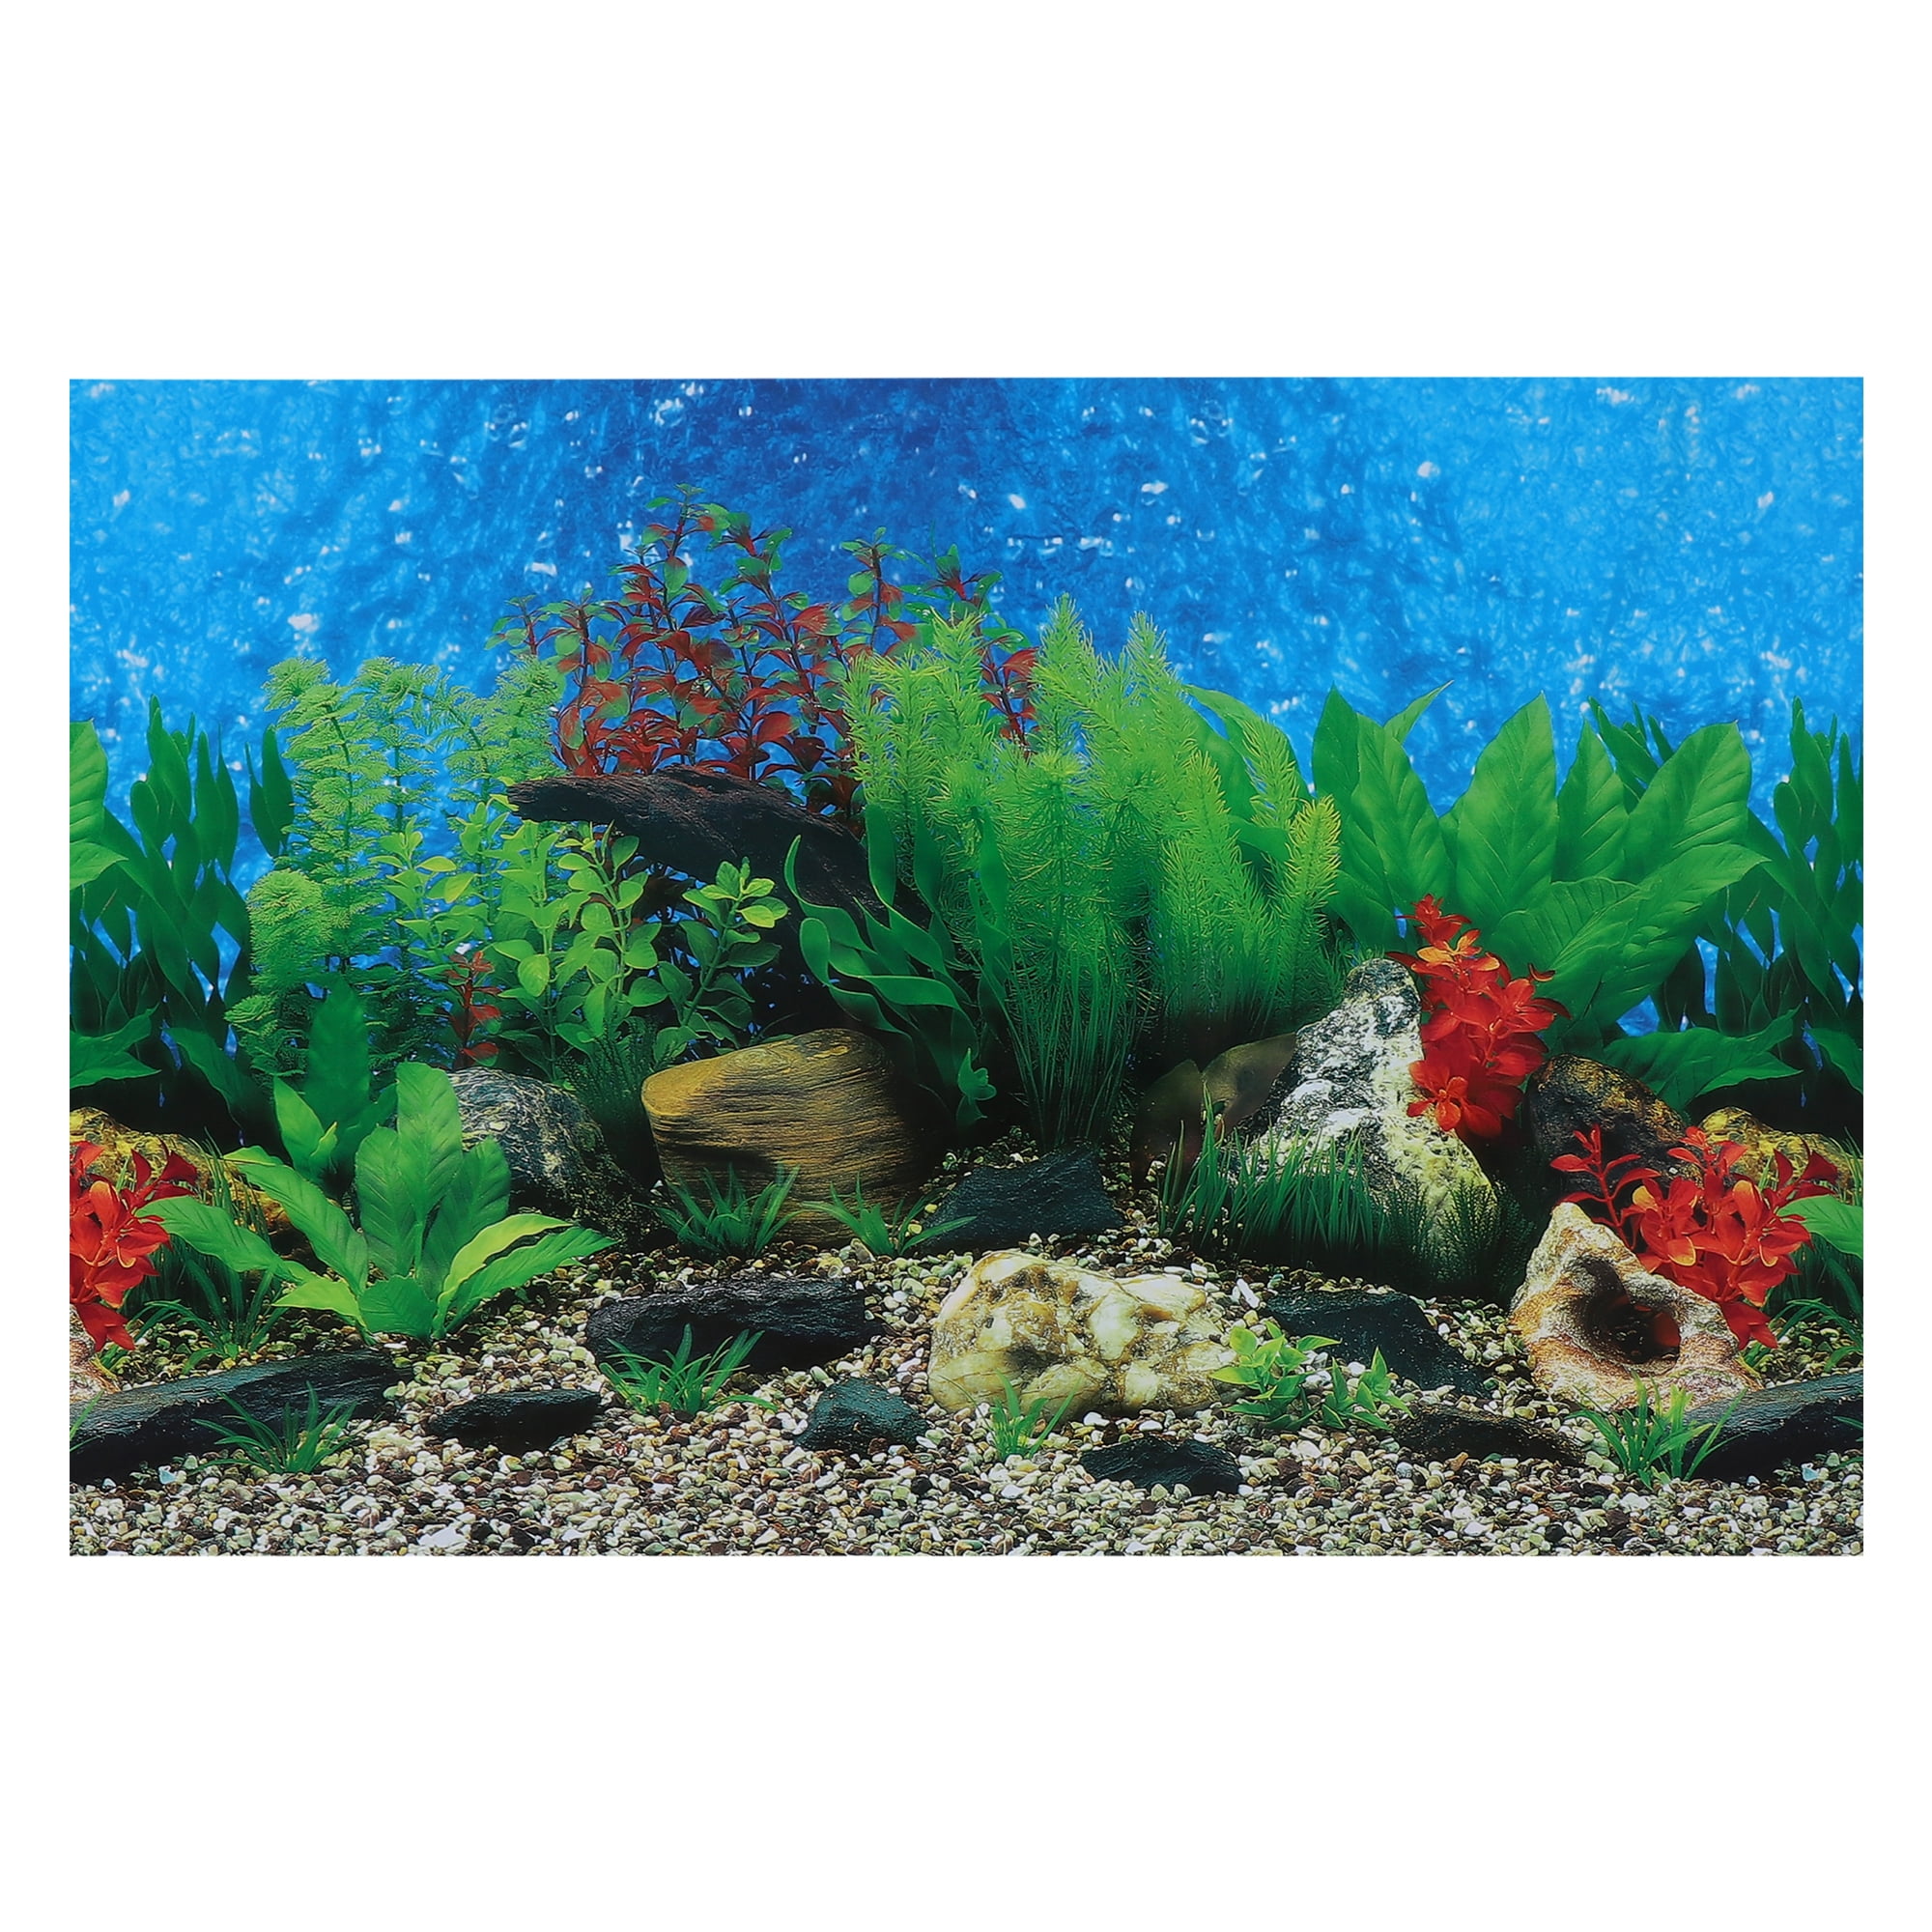 30 40 50 60cm High Blue/ Black Aquarium Background Poster 2 Sided Glossy  Fish Tank Decorative IMAGE Wall Backdrop Decor - Price history & Review, AliExpress Seller - Terra Store